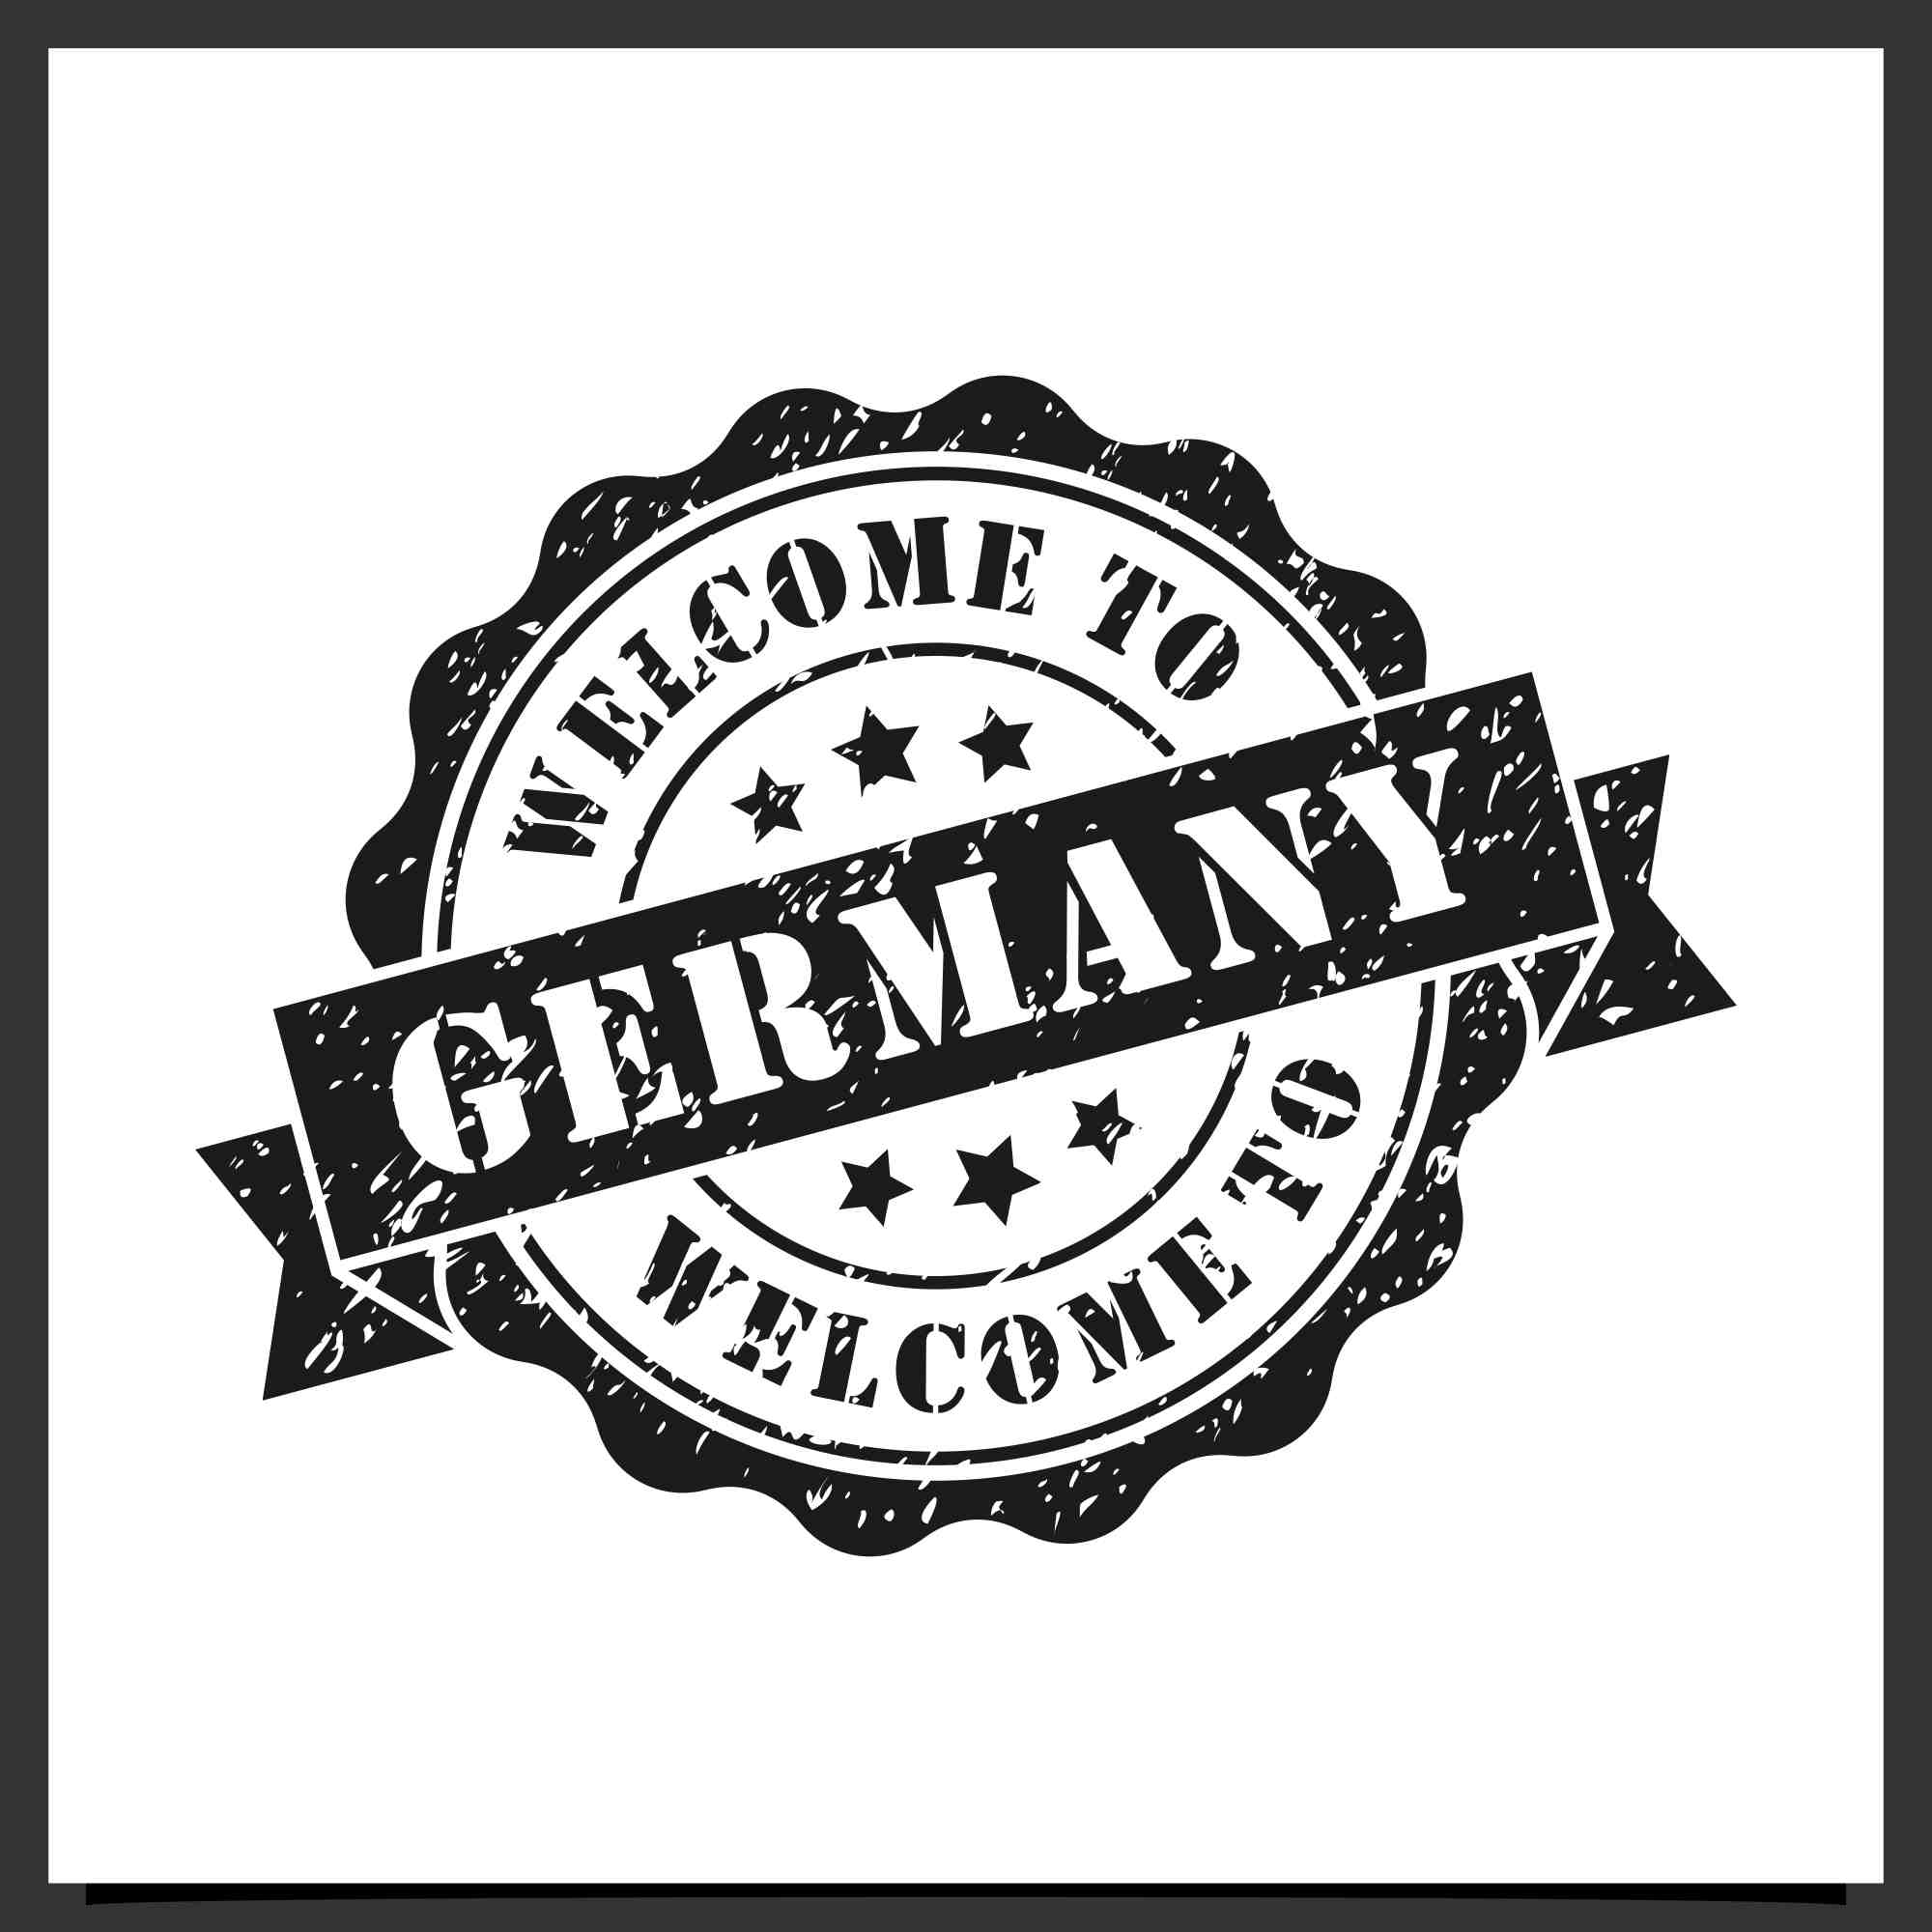 welcome to germany stamps vector logo design collection - $4 preview image.